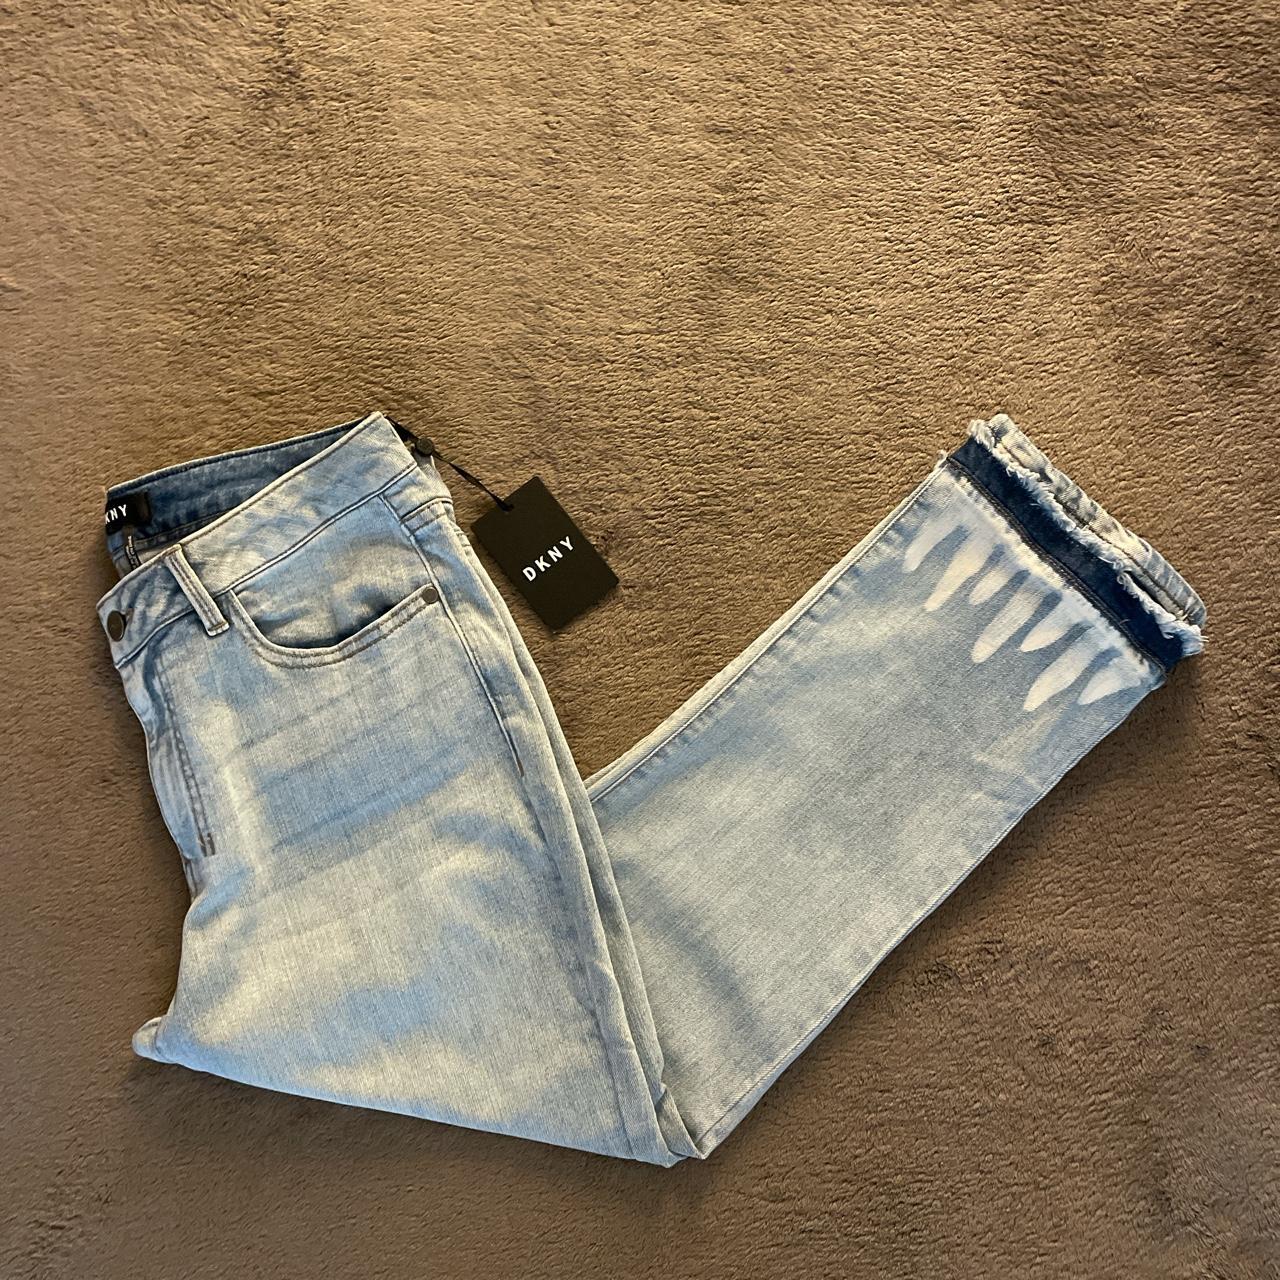 DKNY Jeans, Donna Karan New York Jeans in a size